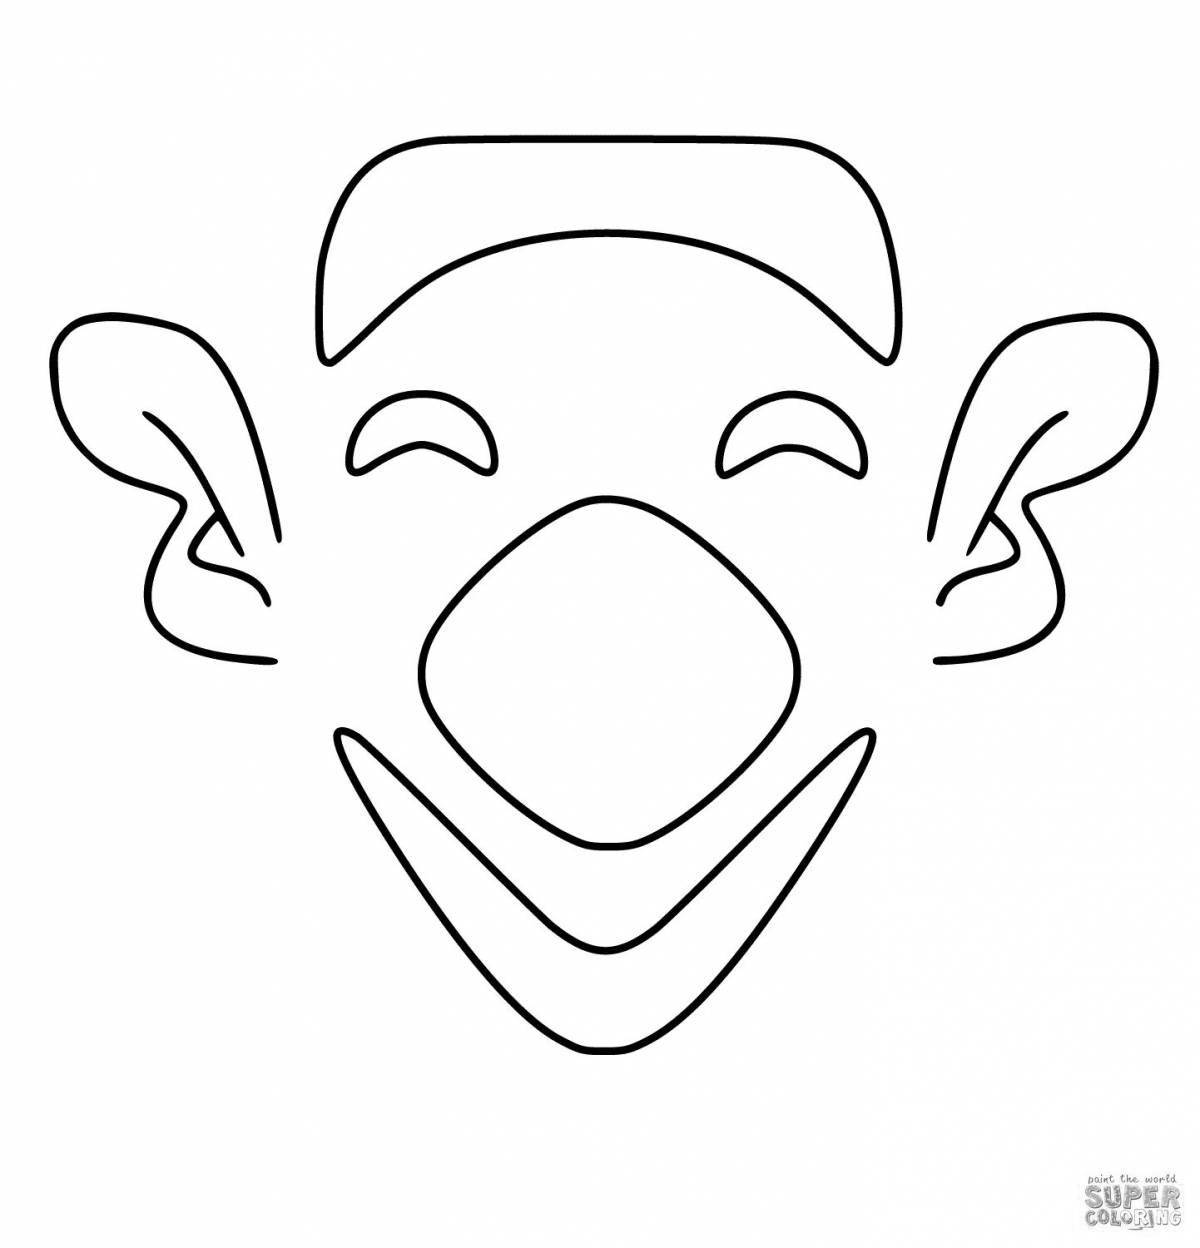 Glorious clown mask coloring page